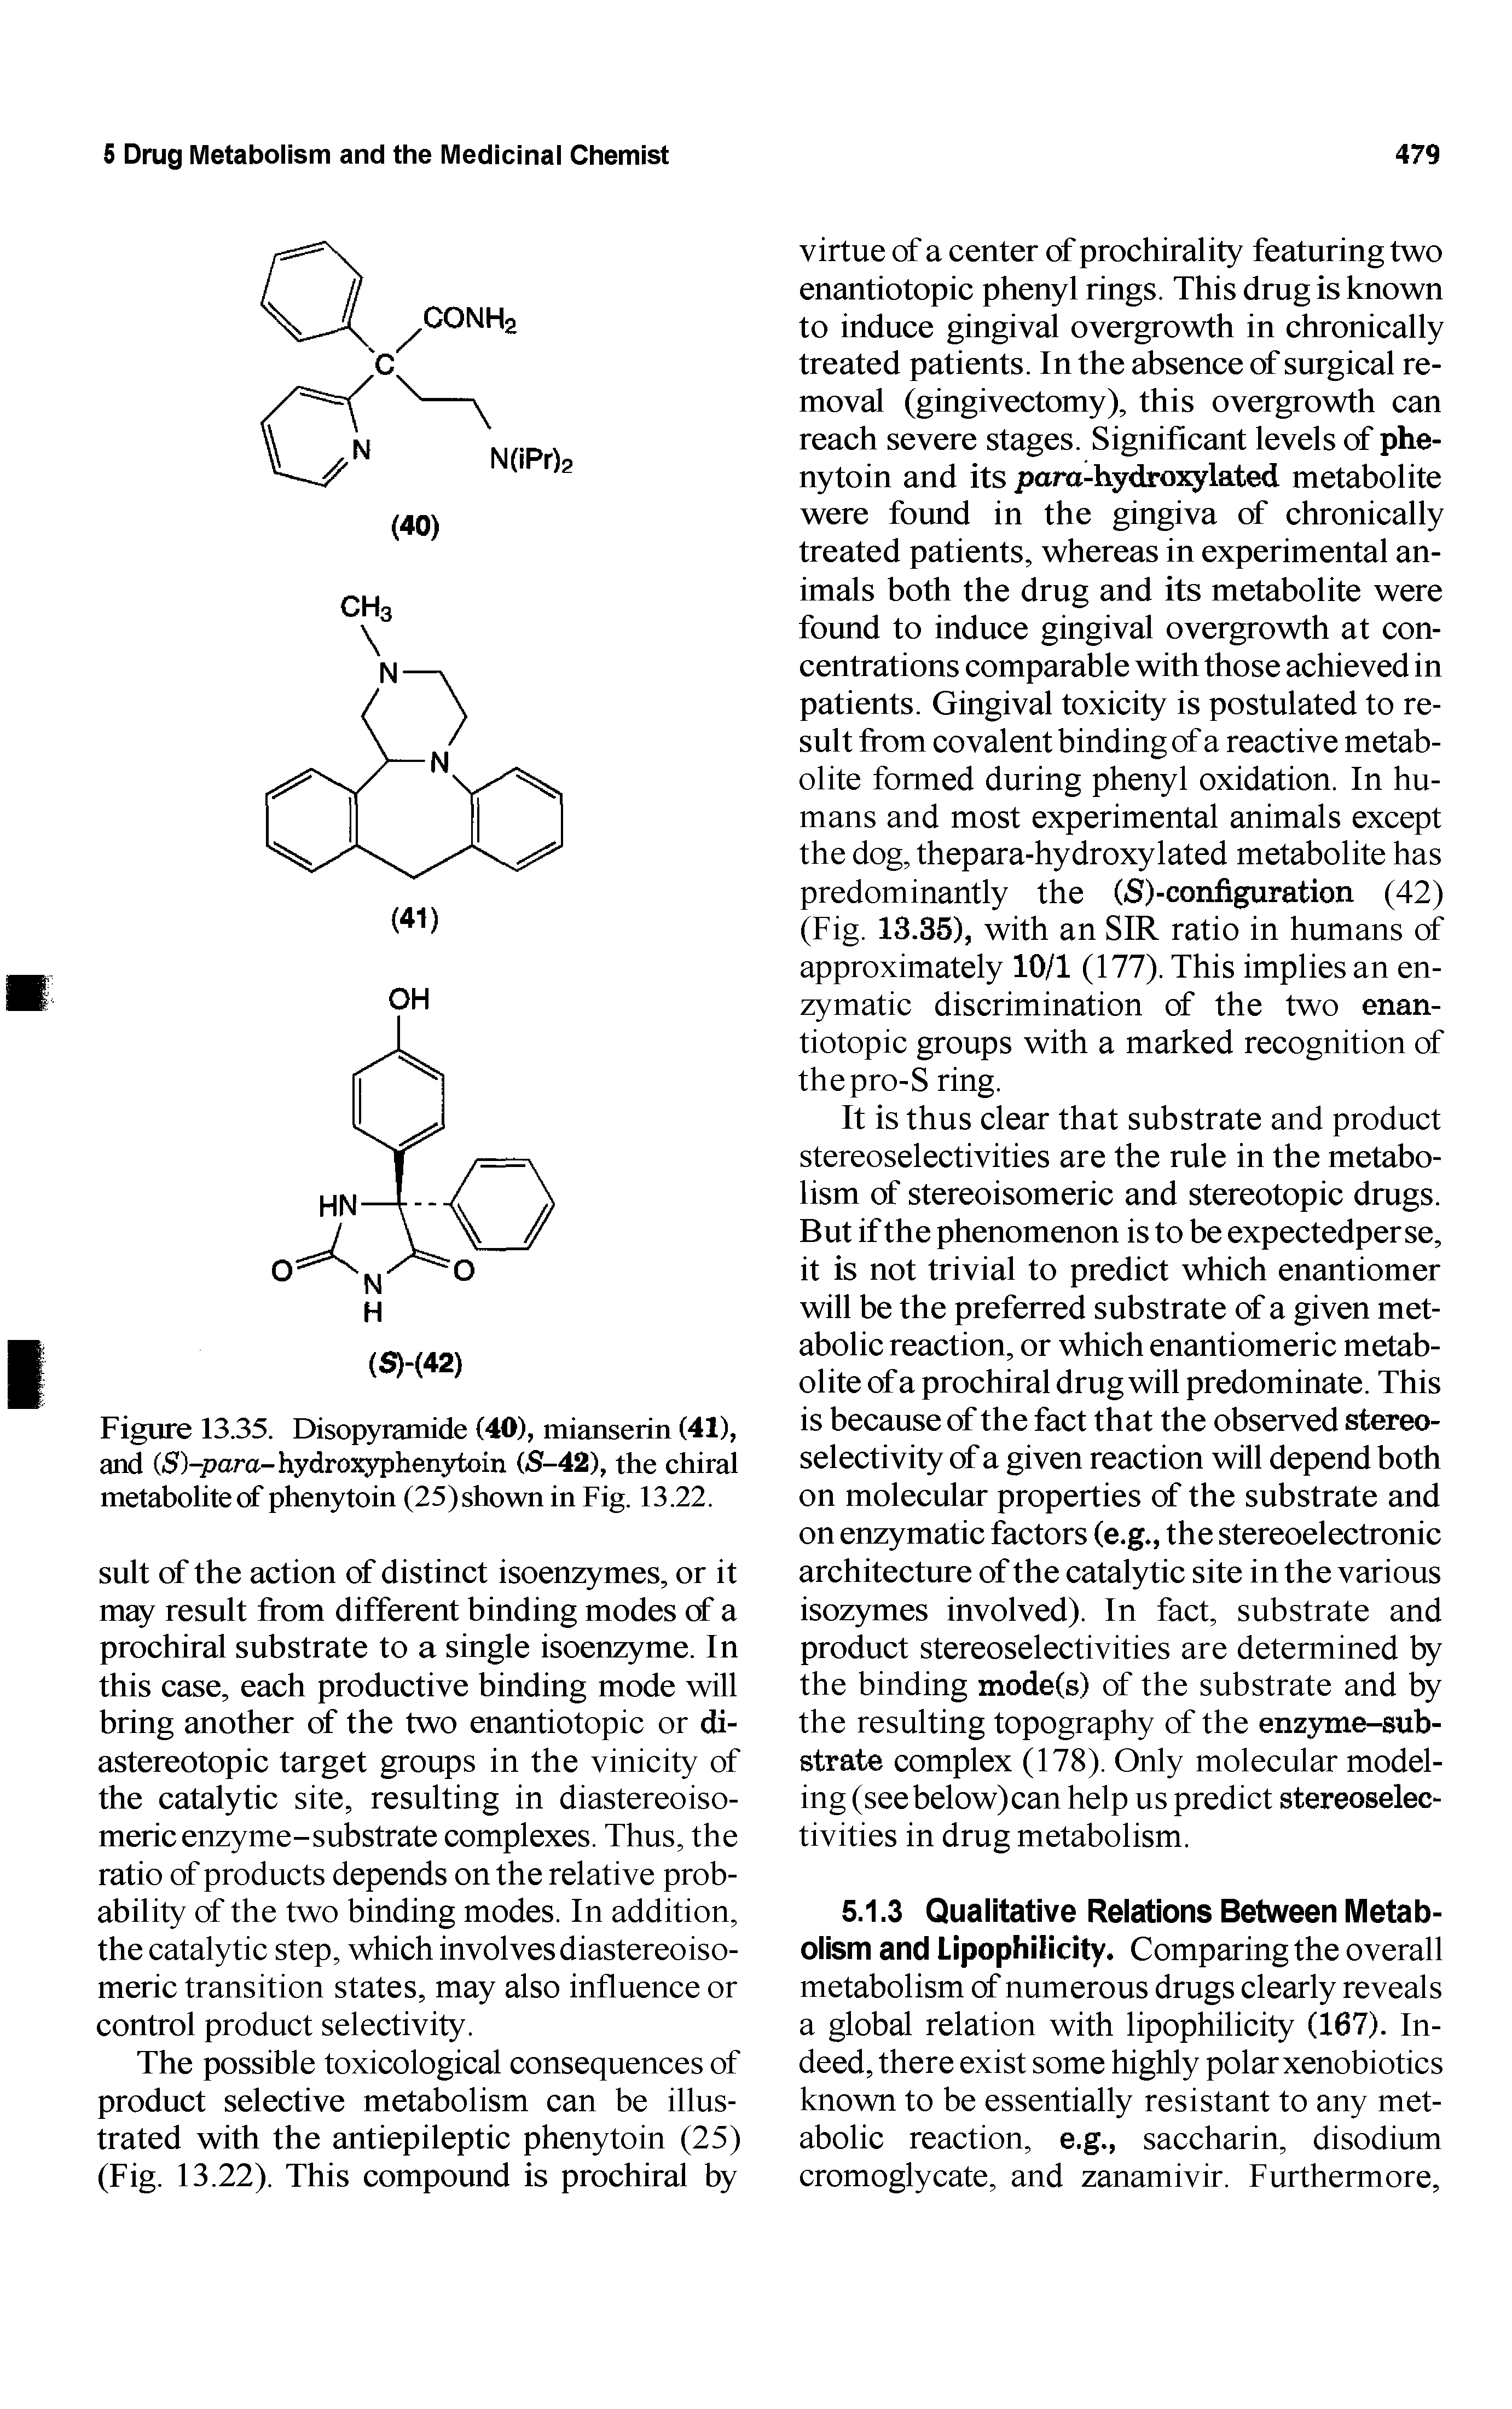 Figure 13.35. Disopyramide (40), mianserin (41), and (5)-para-hydroxyphen3doin (S-42), the chiral metabolite of phenytoin (25)shown in Fig. 13.22.